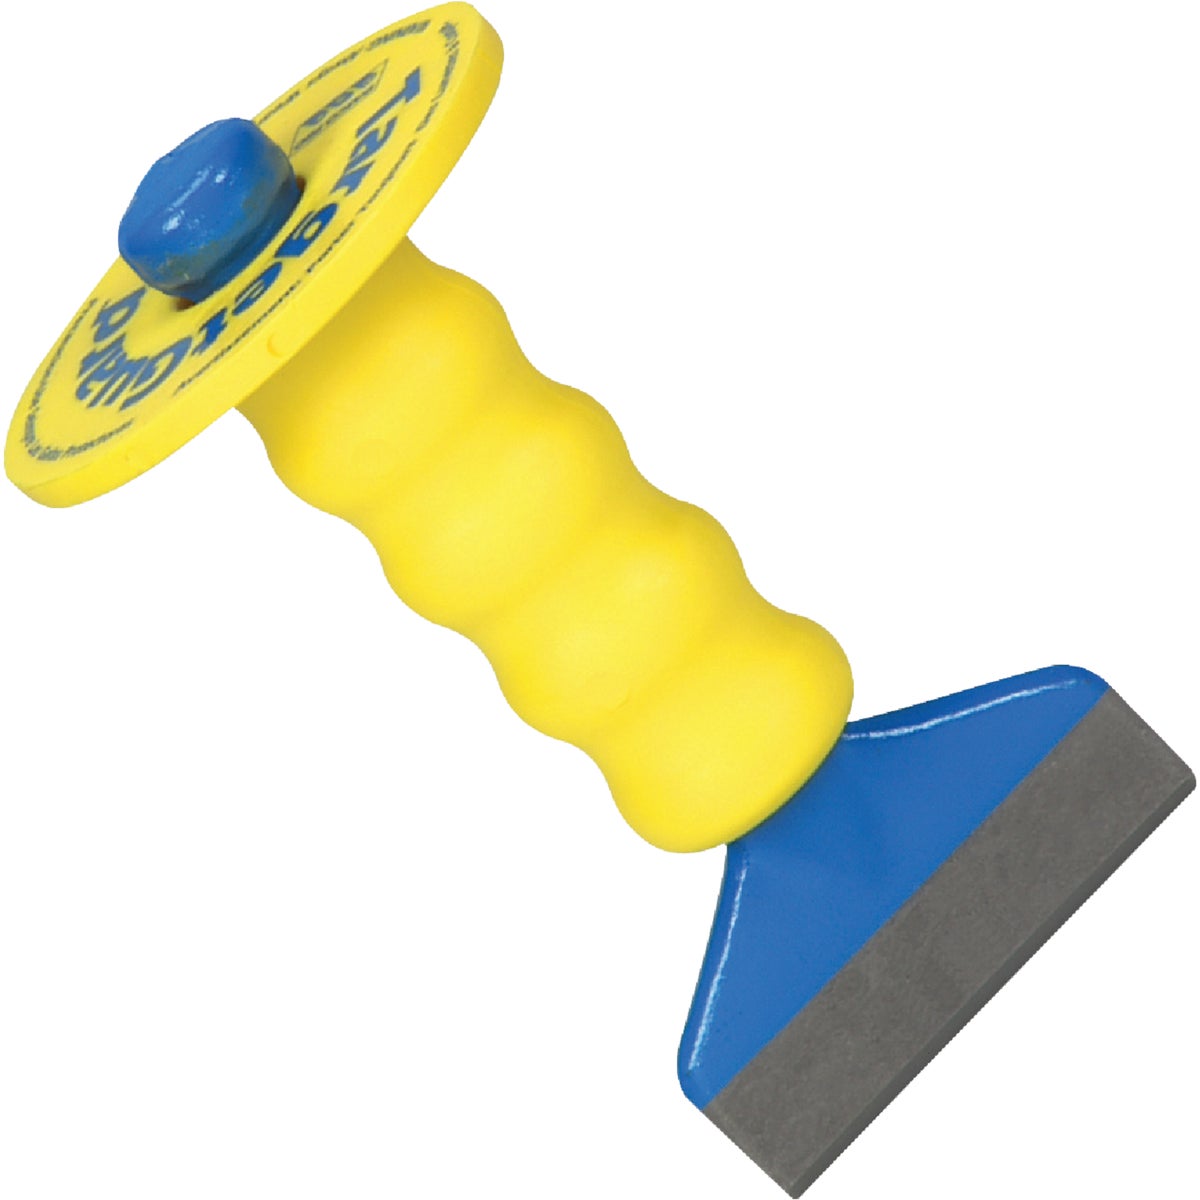 Item 368652, Durable, yellow plastic guard is permanently molded to steel tool to 